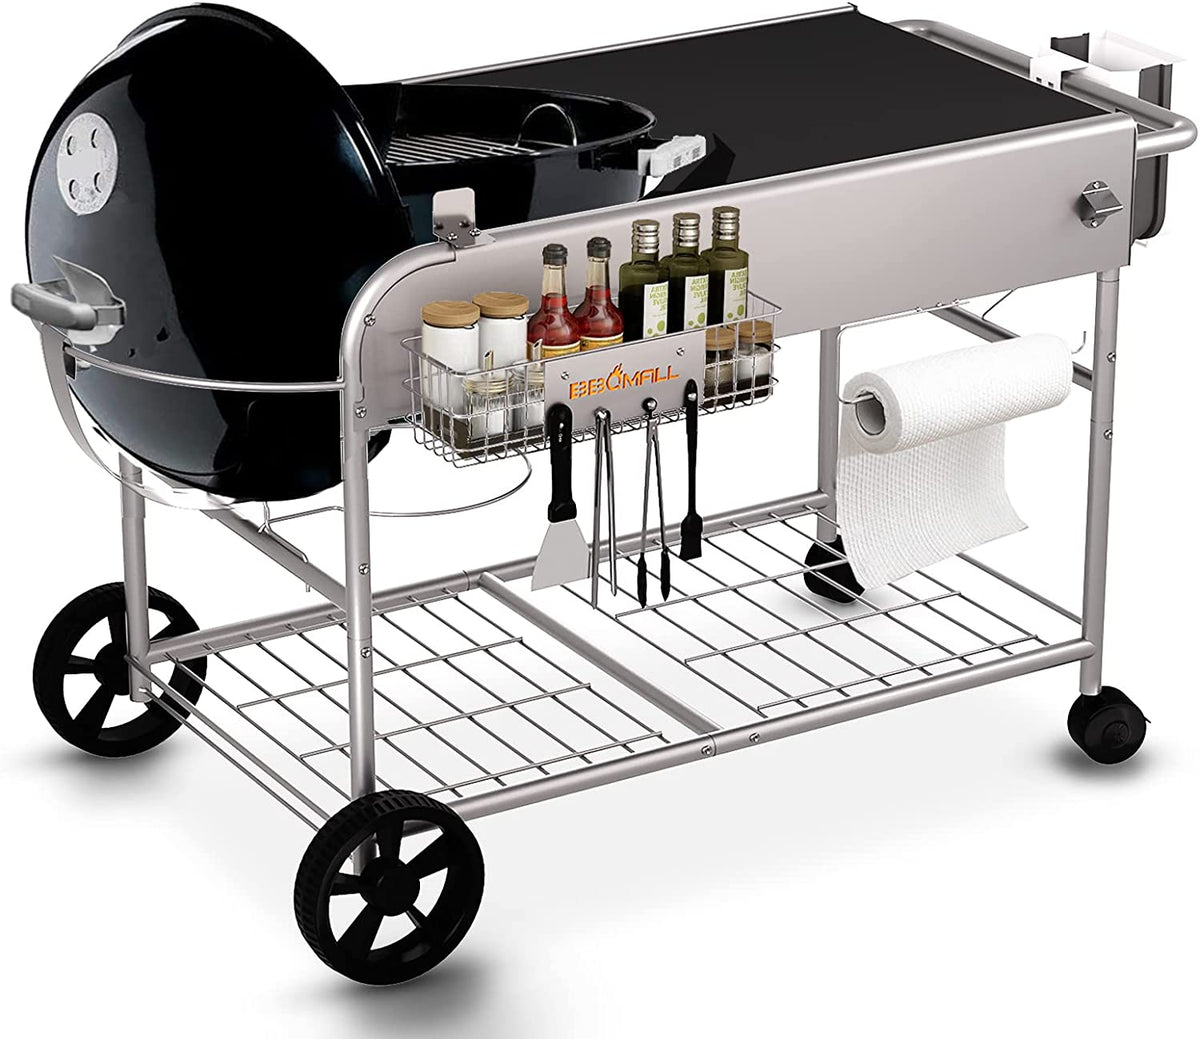 GrillPartsReplacement - Online BBQ Parts Retailer Grill Table Stand Cart for Weber 22 and 18“ Original Kettle, Performer, Jumbo Joe and Master-Touch Charcoal Grills, Outdoor Prep Cooking Station